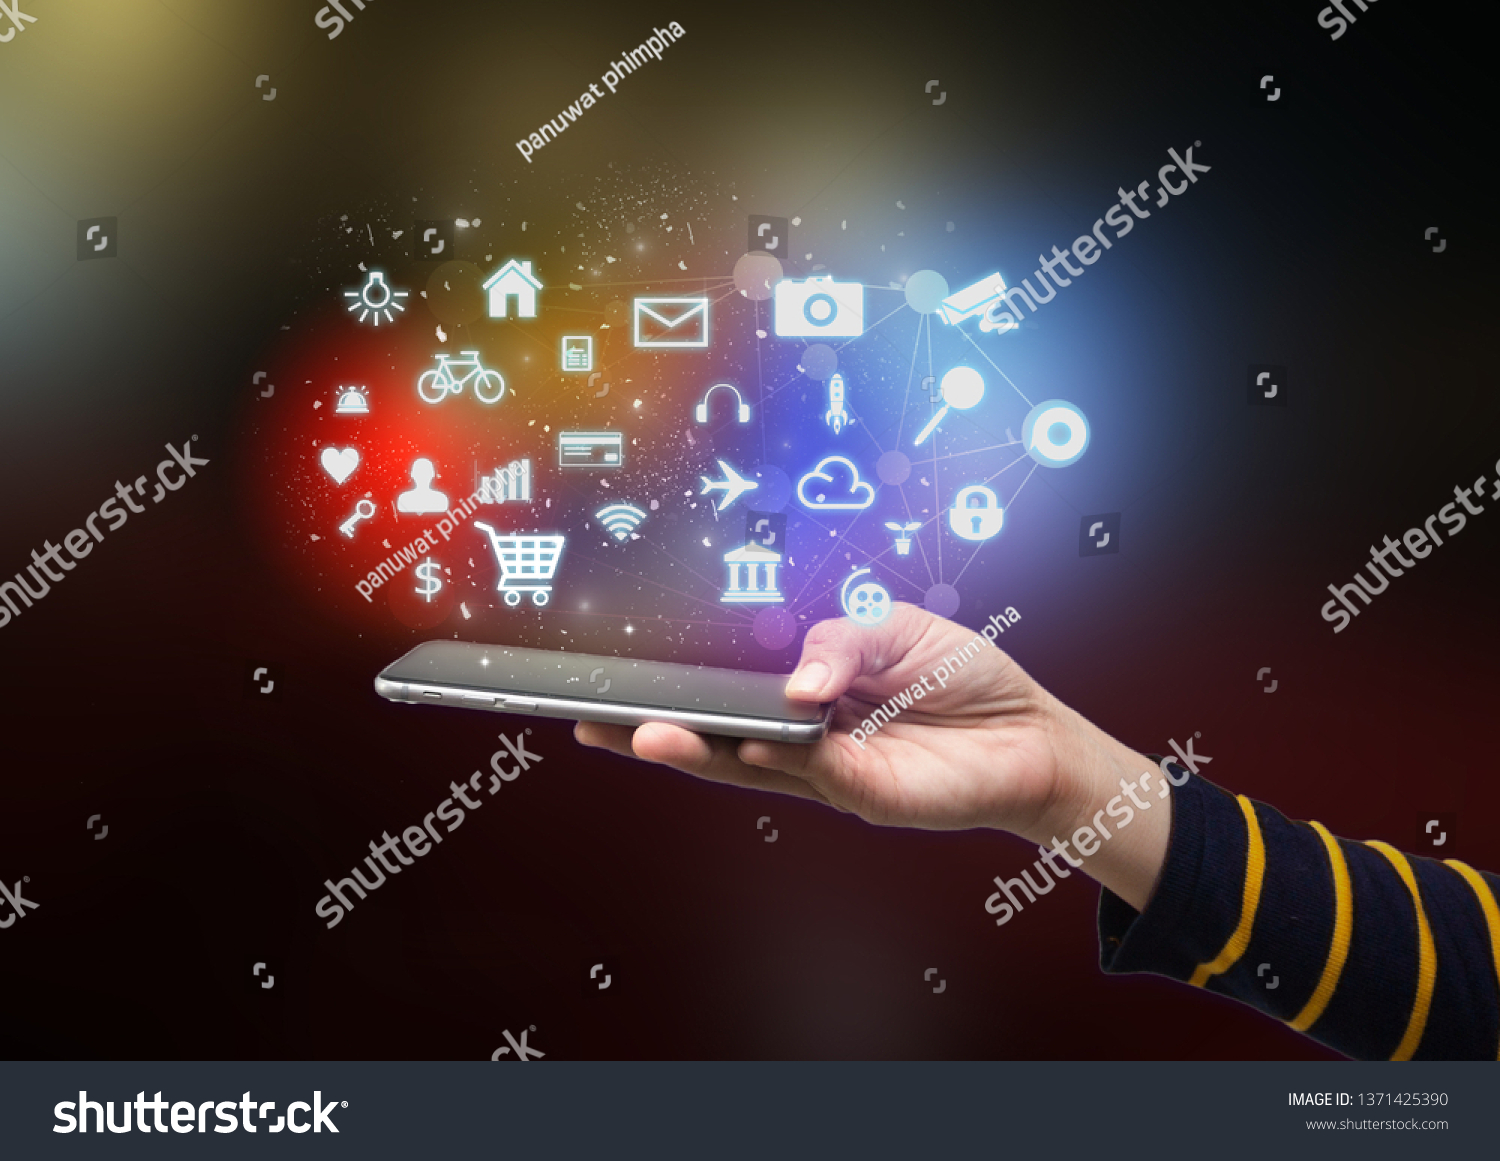 Mobile Application concept.hand holding smart phone - Image #1371425390